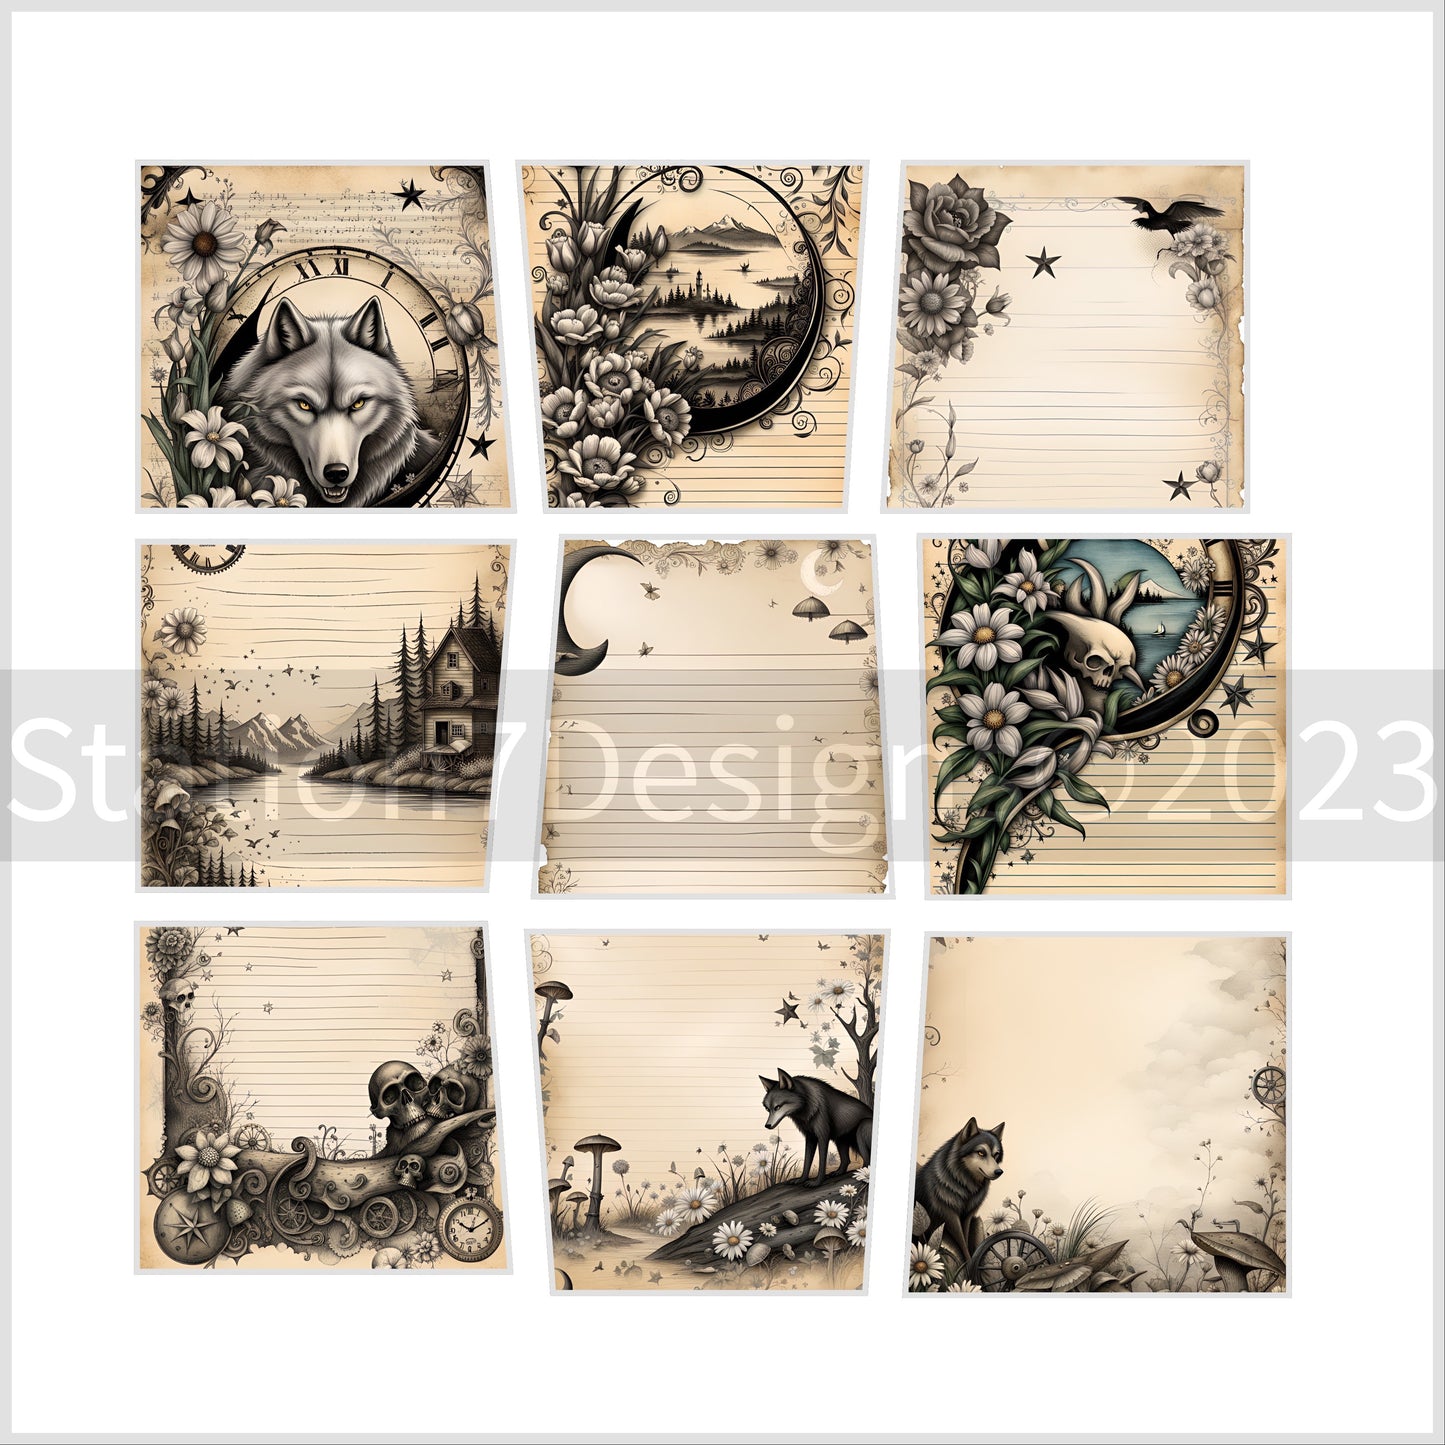 The Gothic Wilds Antiqued Junk Journal Stationery Scrapbooking Set Of 25 Prints-Recycled Linen Paper Or Card Stock